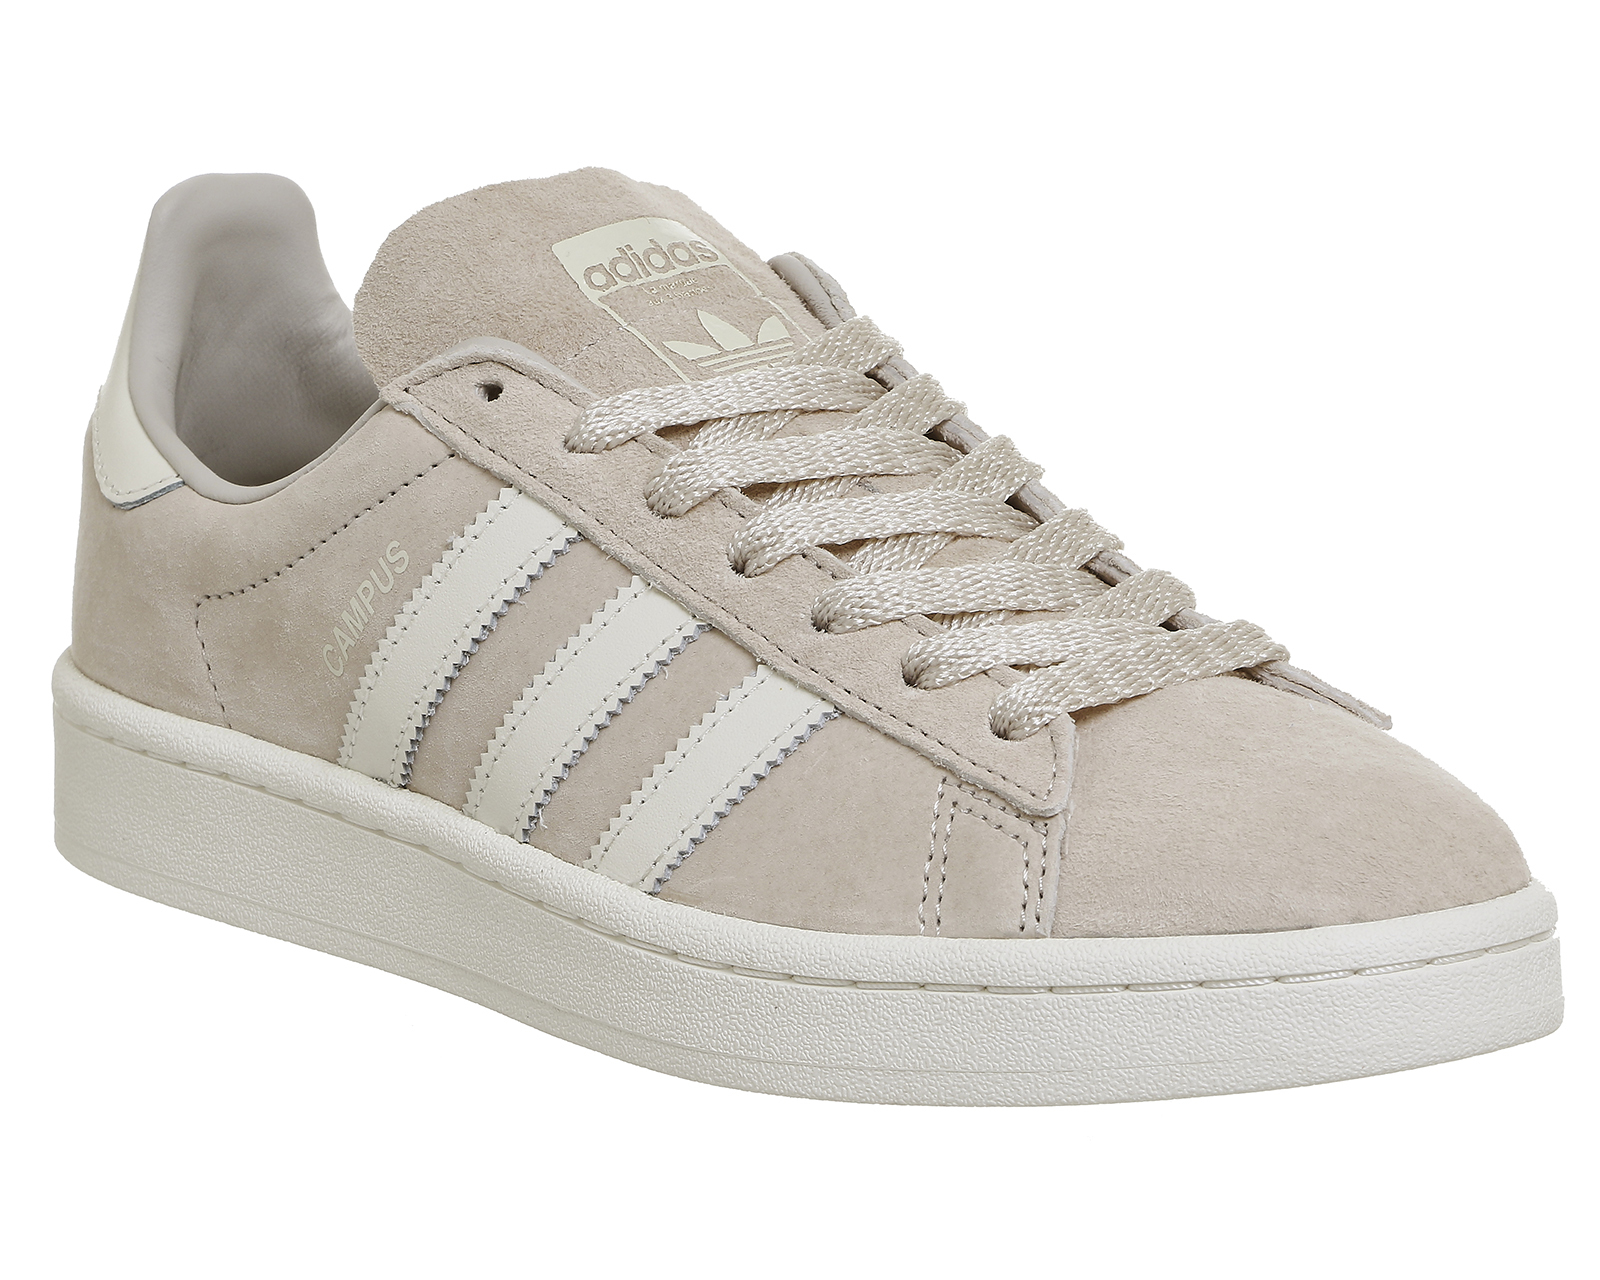 adidas Campus Clear Brown Off White - Unisex Sports